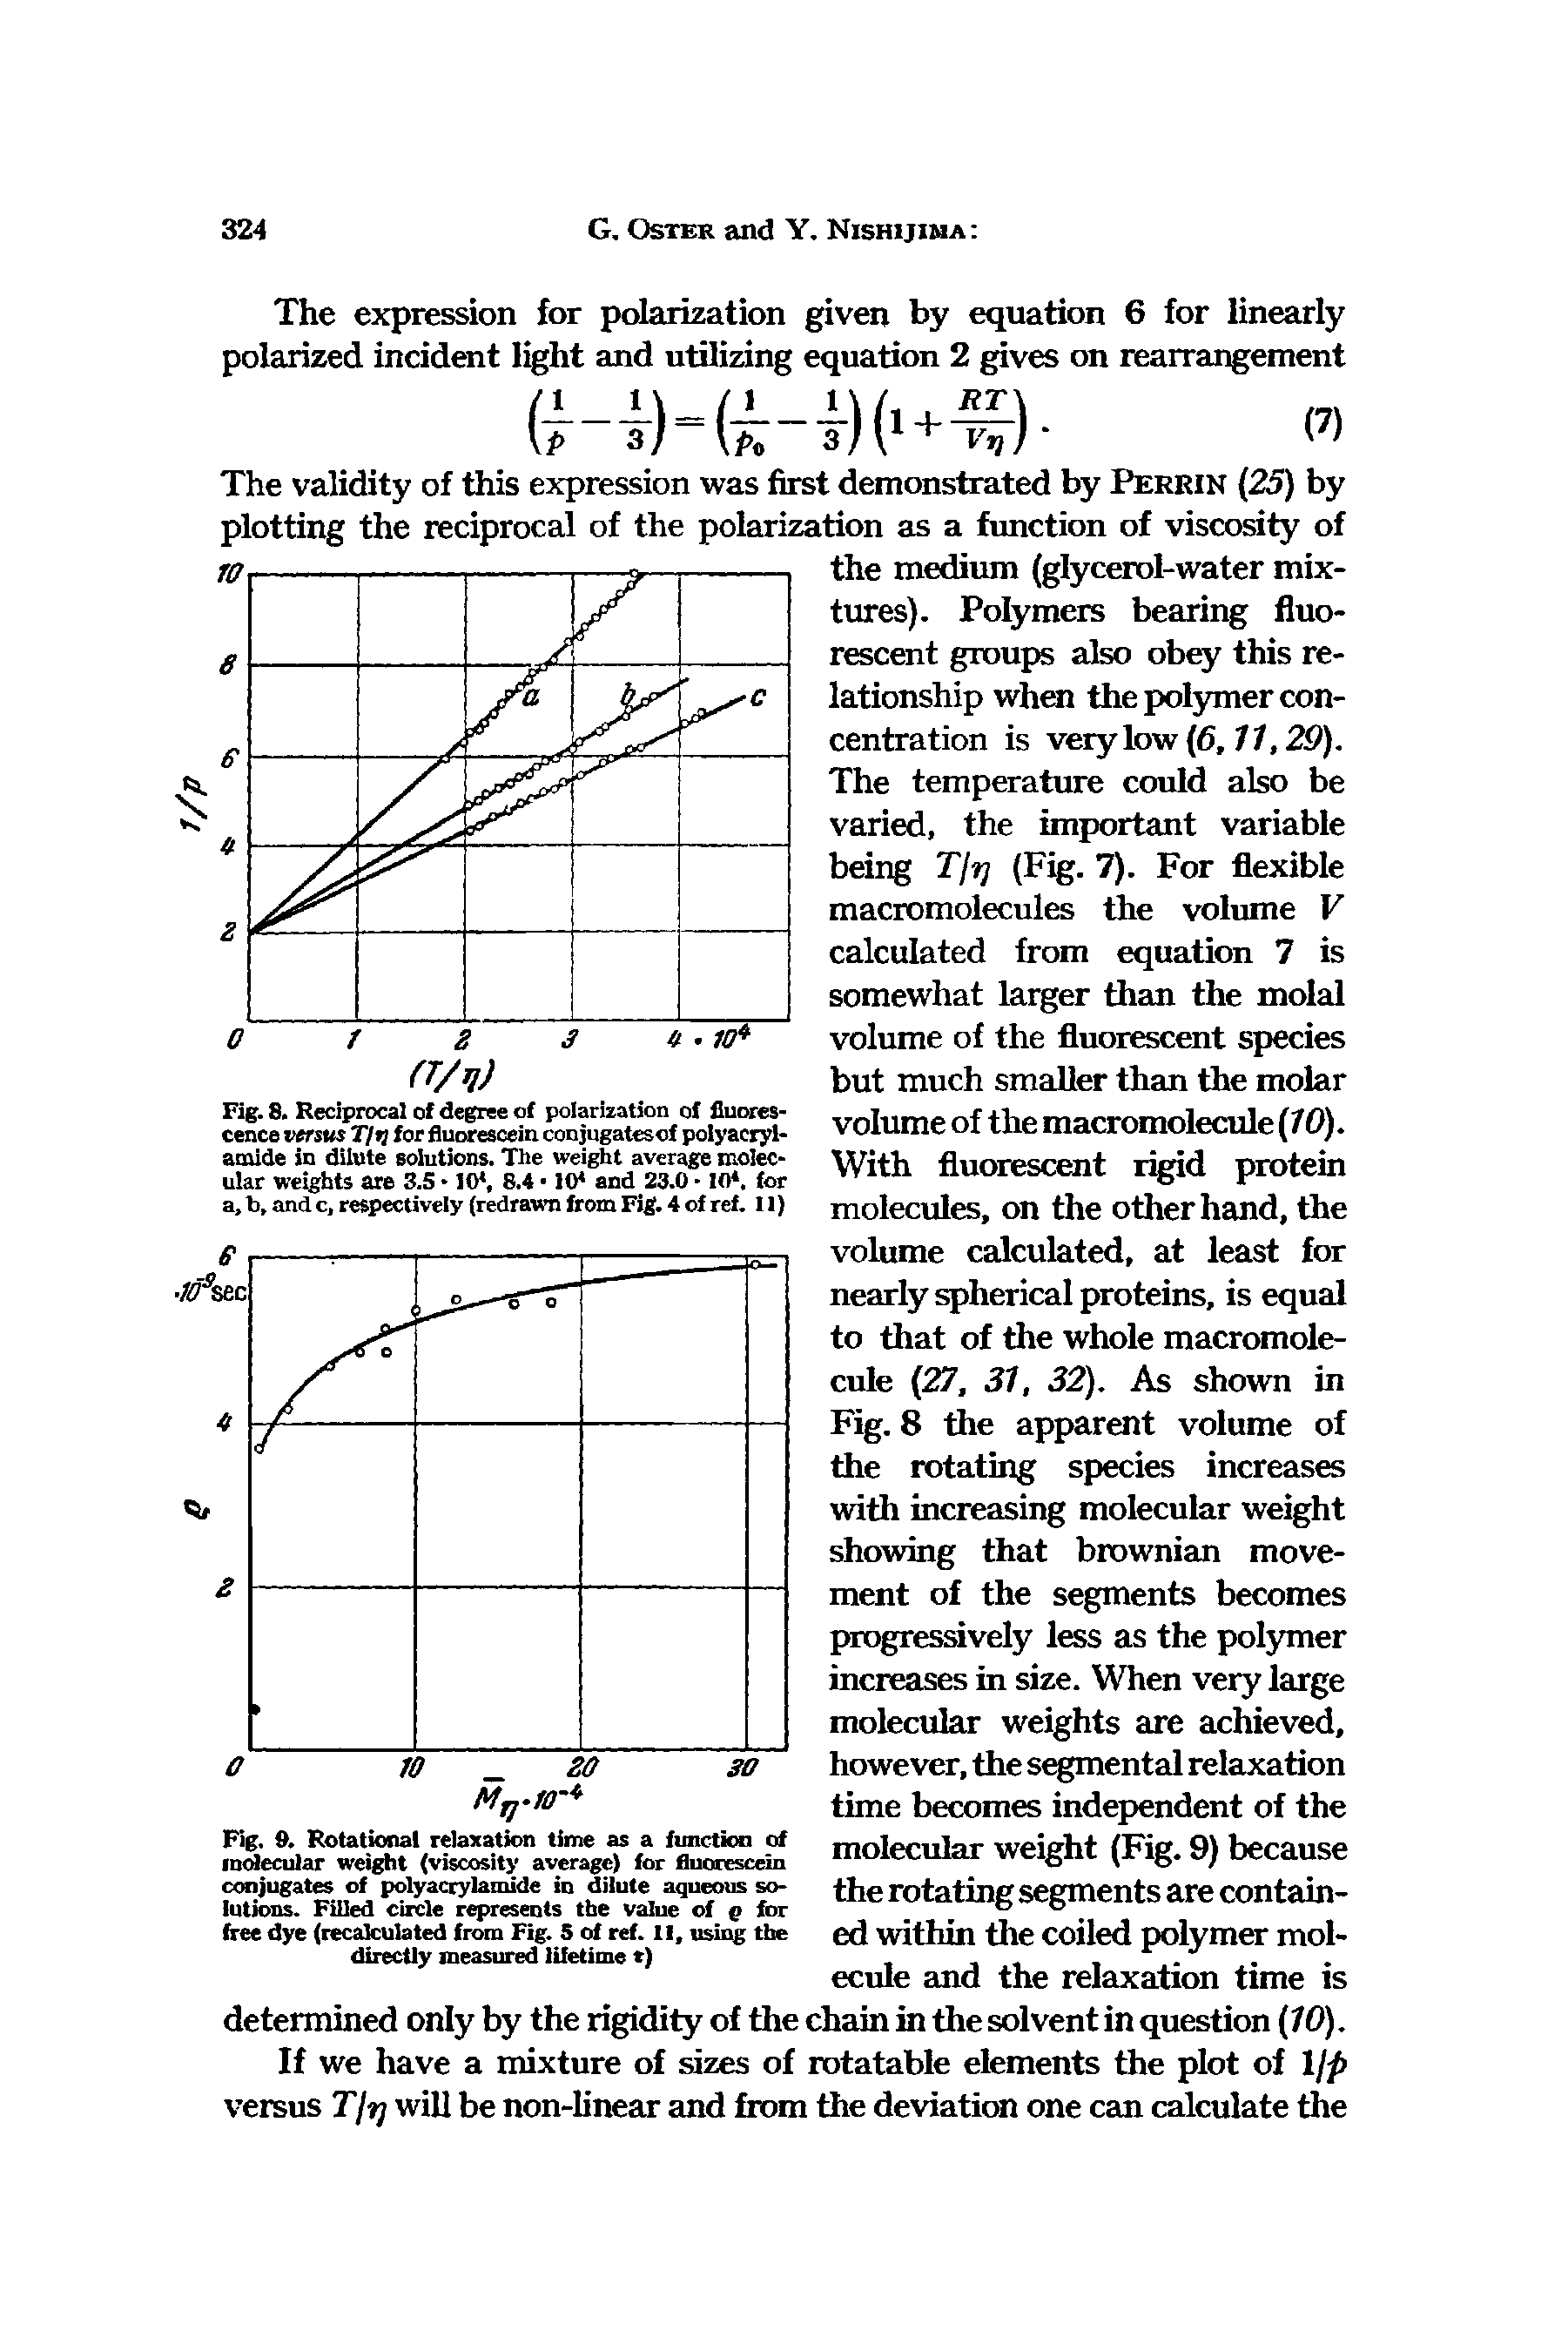 Fig. 8. Reciprocal of degree of polarization of fluorescence versus T/rj for fluorescein conjugates of polyacrylamide in dilute solutions. The weight average molecular weights are 3.5 10 8.4 10 and 23.0 10. for a, b, and c, respectively (redrawn from Fig. 4 of ref. 11)...